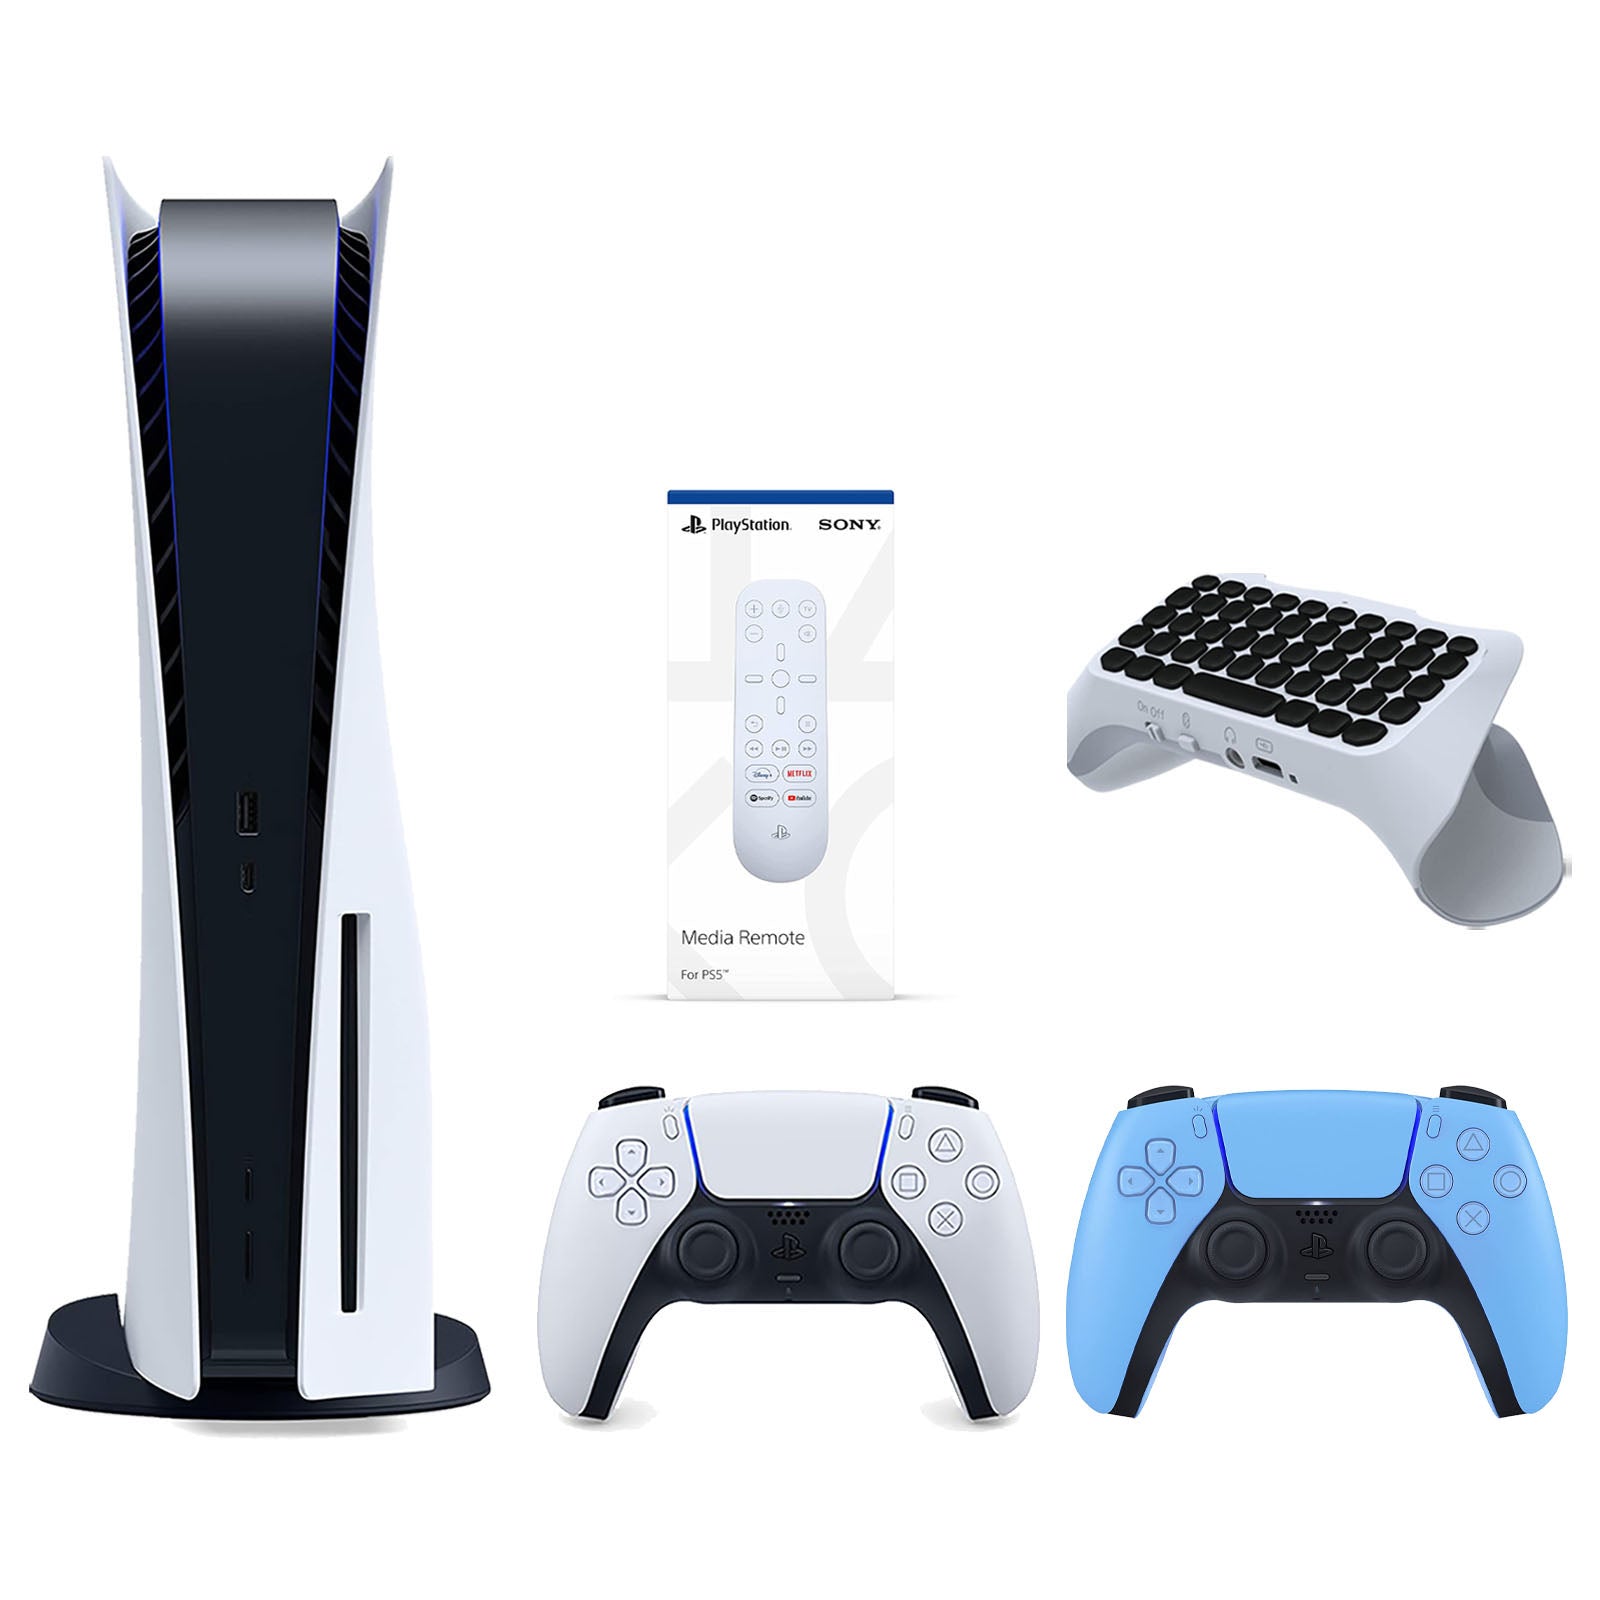 Sony Playstation 5 Disc Version Console with Extra Blue Controller, Media Remote and Surge QuickType 2.0 Wireless PS5 Controller Keypad Bundle - Pro-Distributing